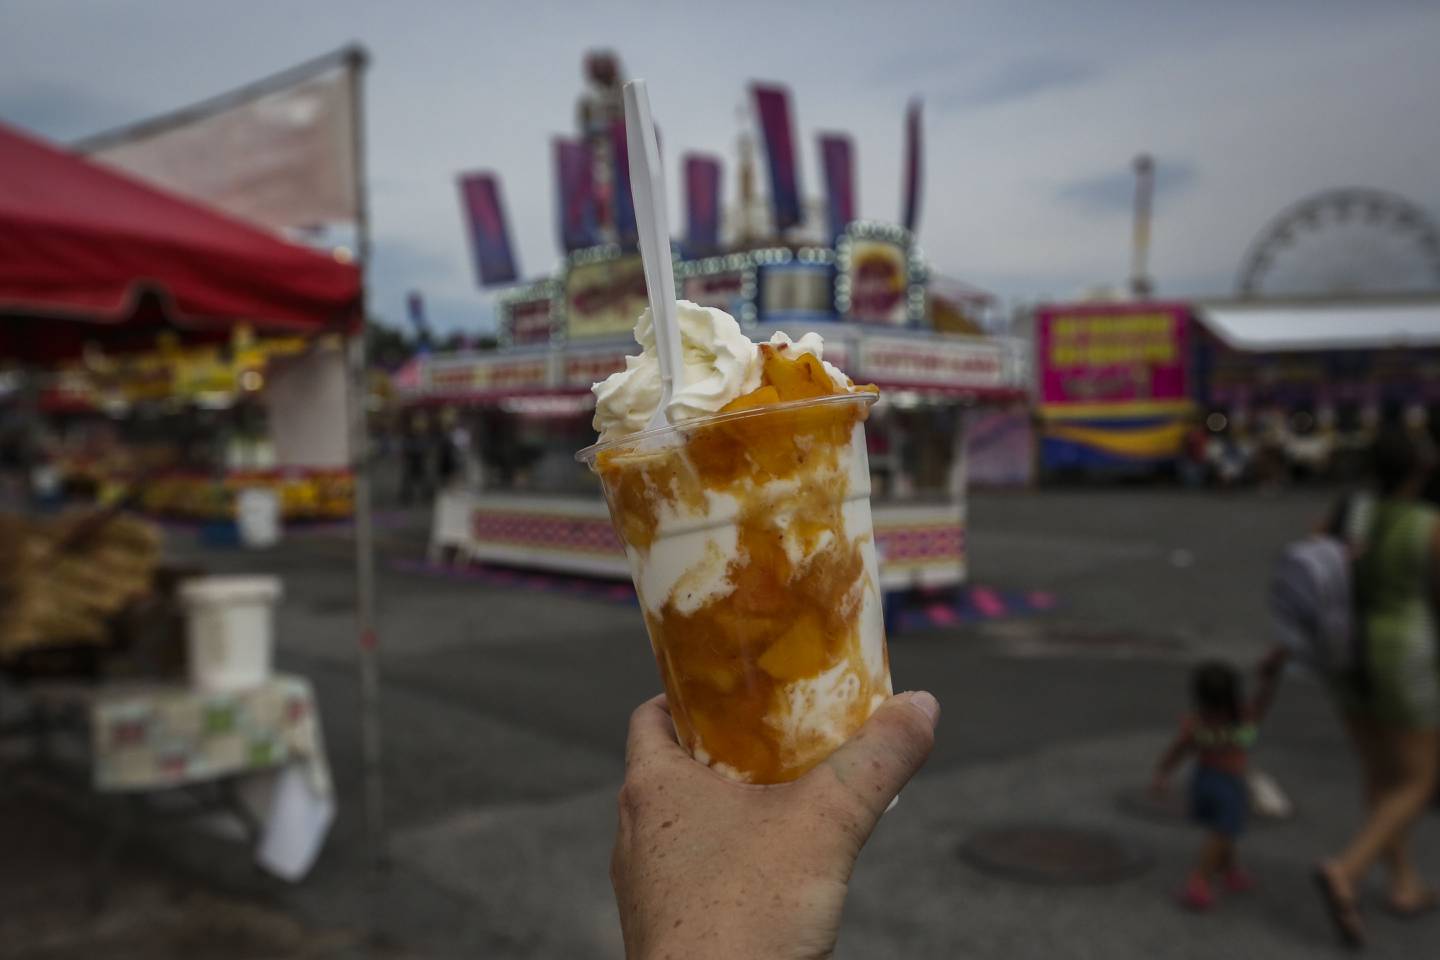 Farmer Stan of Green Meadows Farm shows off his original and sought after Peach Sundae at the Maryland State Fair on opening night in Timonium, MD on August 25, 2022.